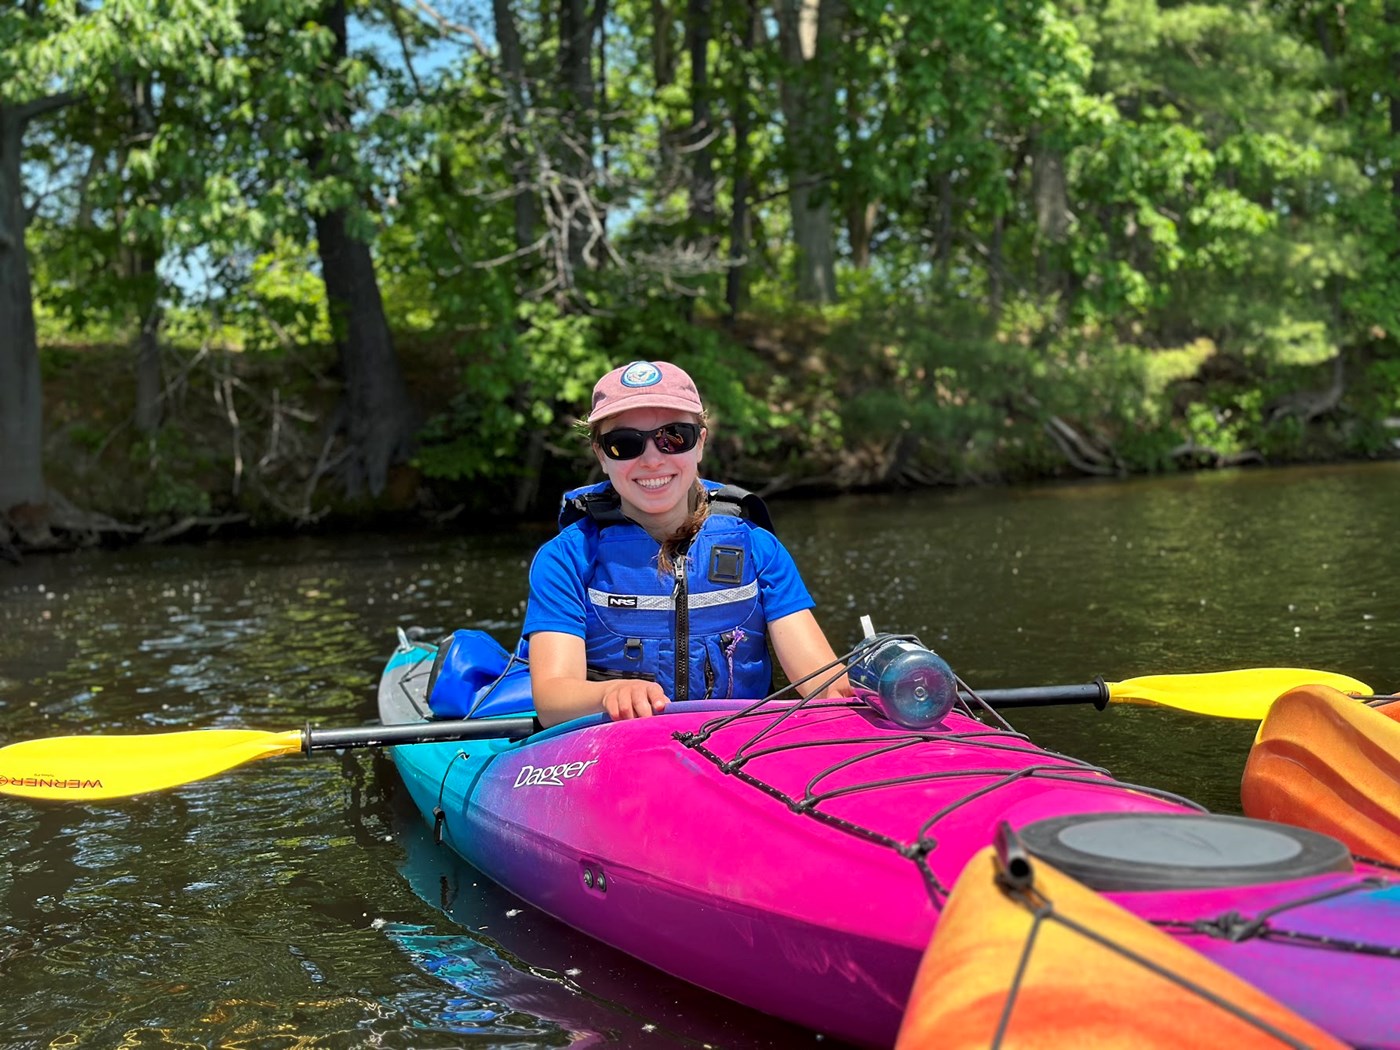 A person wearing sunglasses and a hat floats in a kayak on a bright sunny day.